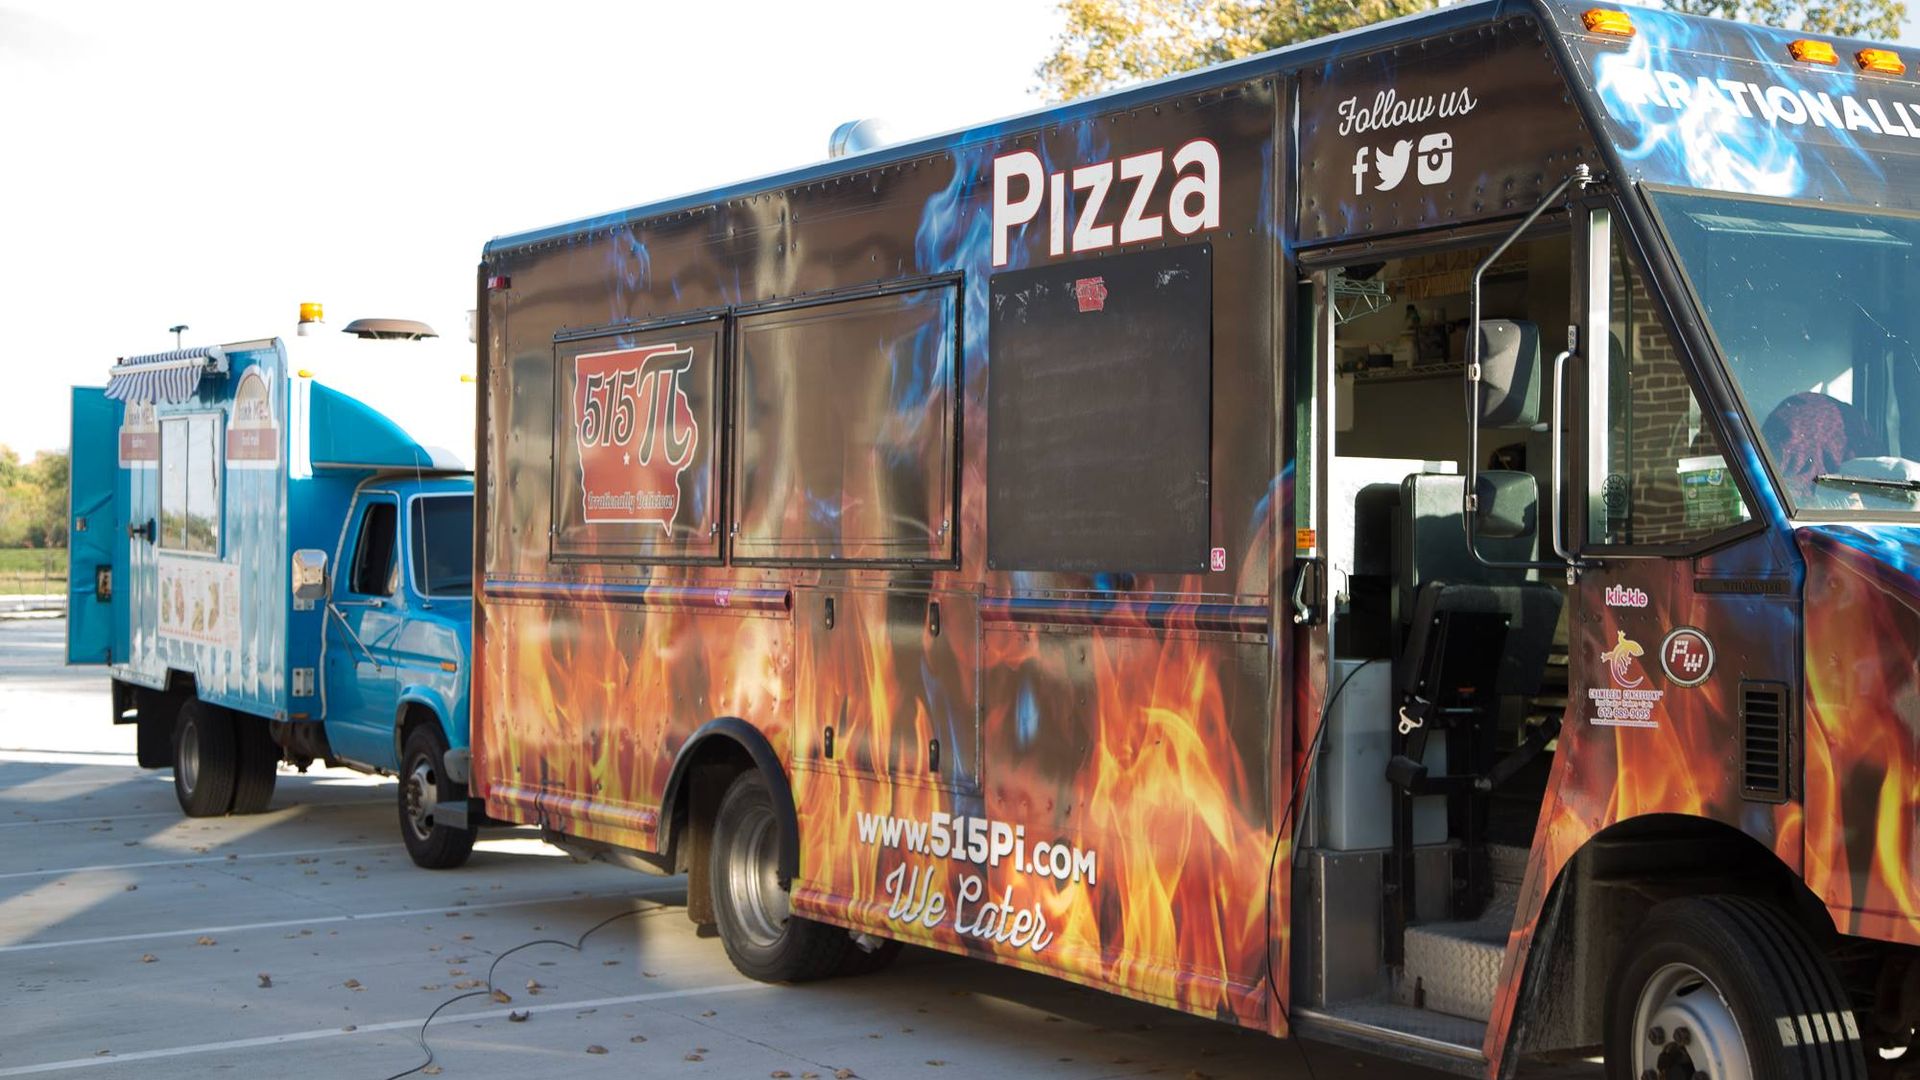 A picture of 515 Pi food truck